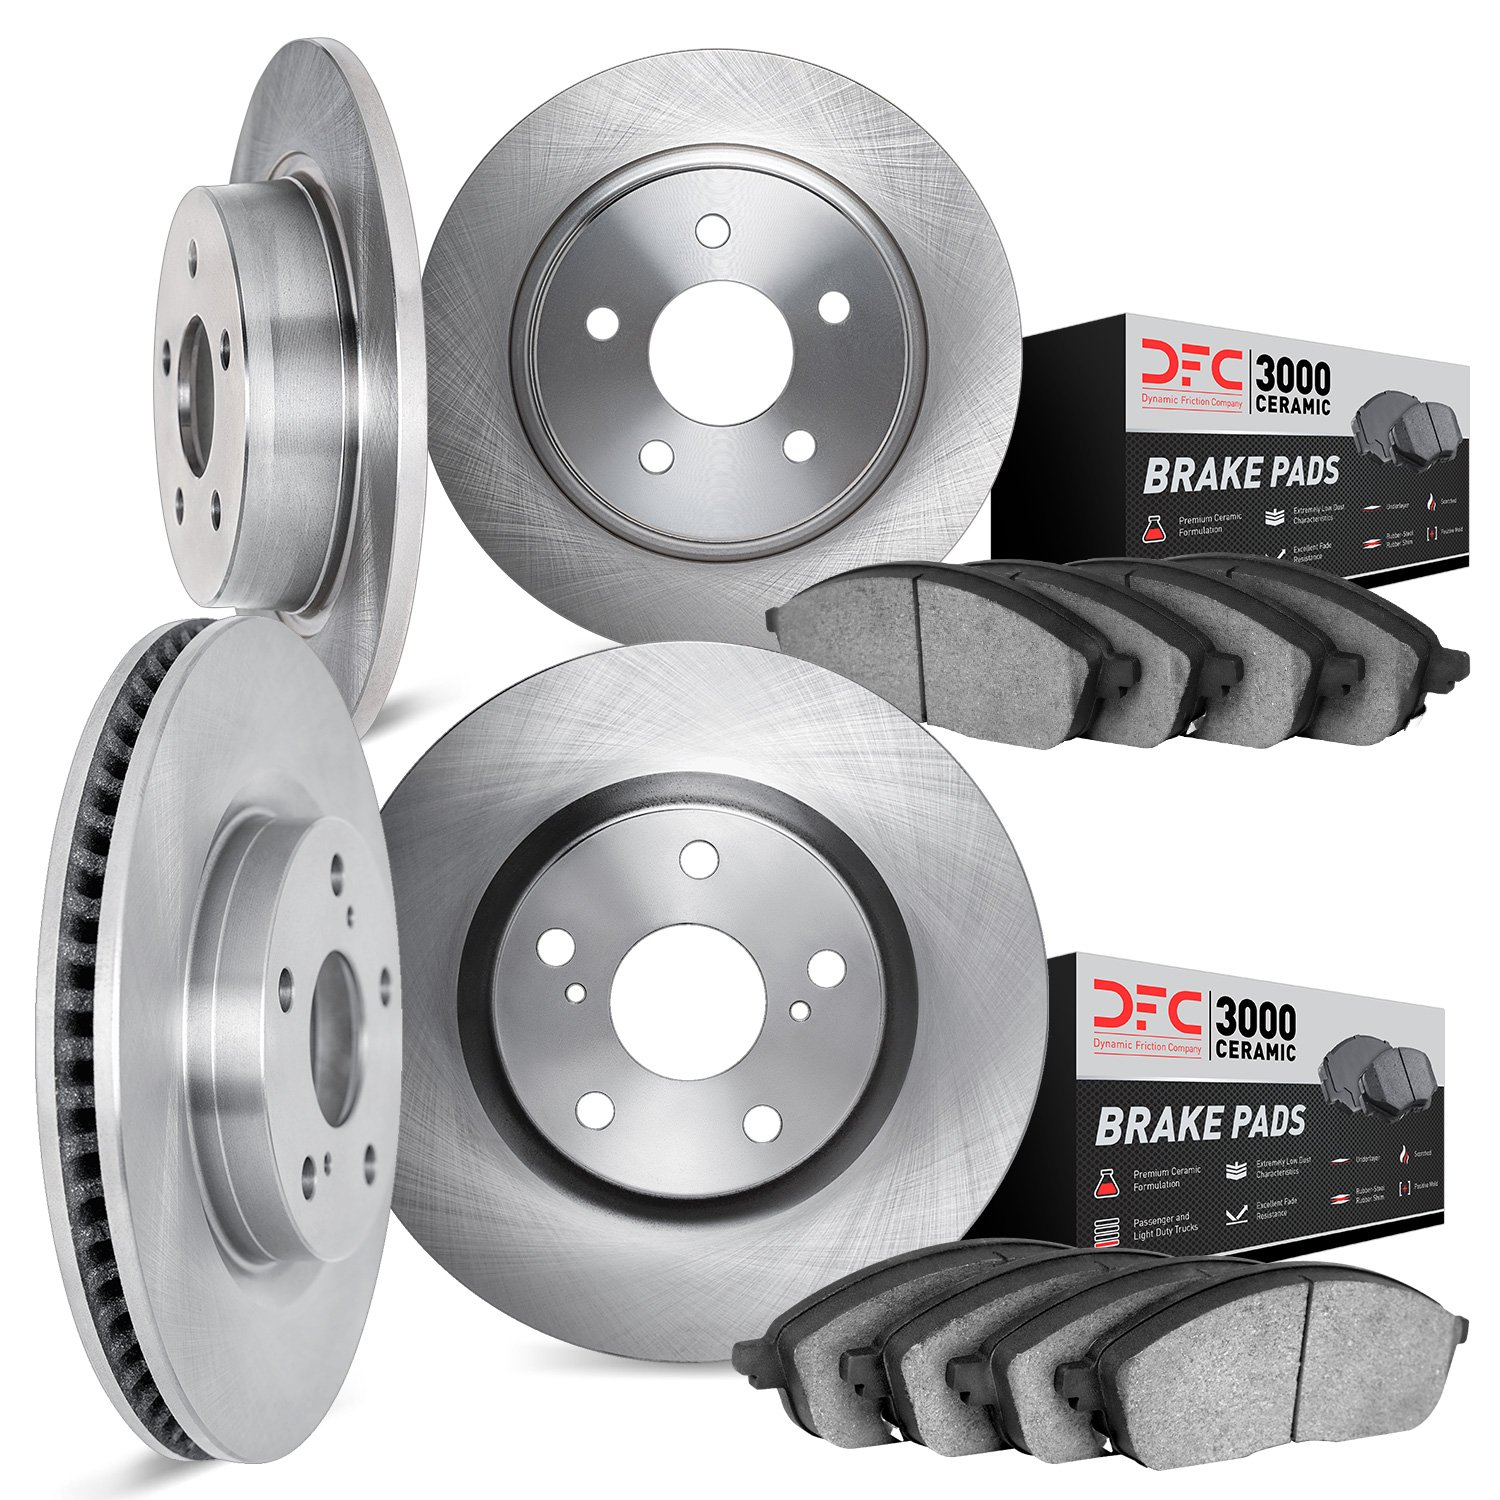 6304-76056 Brake Rotors with 3000-Series Ceramic Brake Pads Kit, 2002-2006 Lexus/Toyota/Scion, Position: Front and Rear